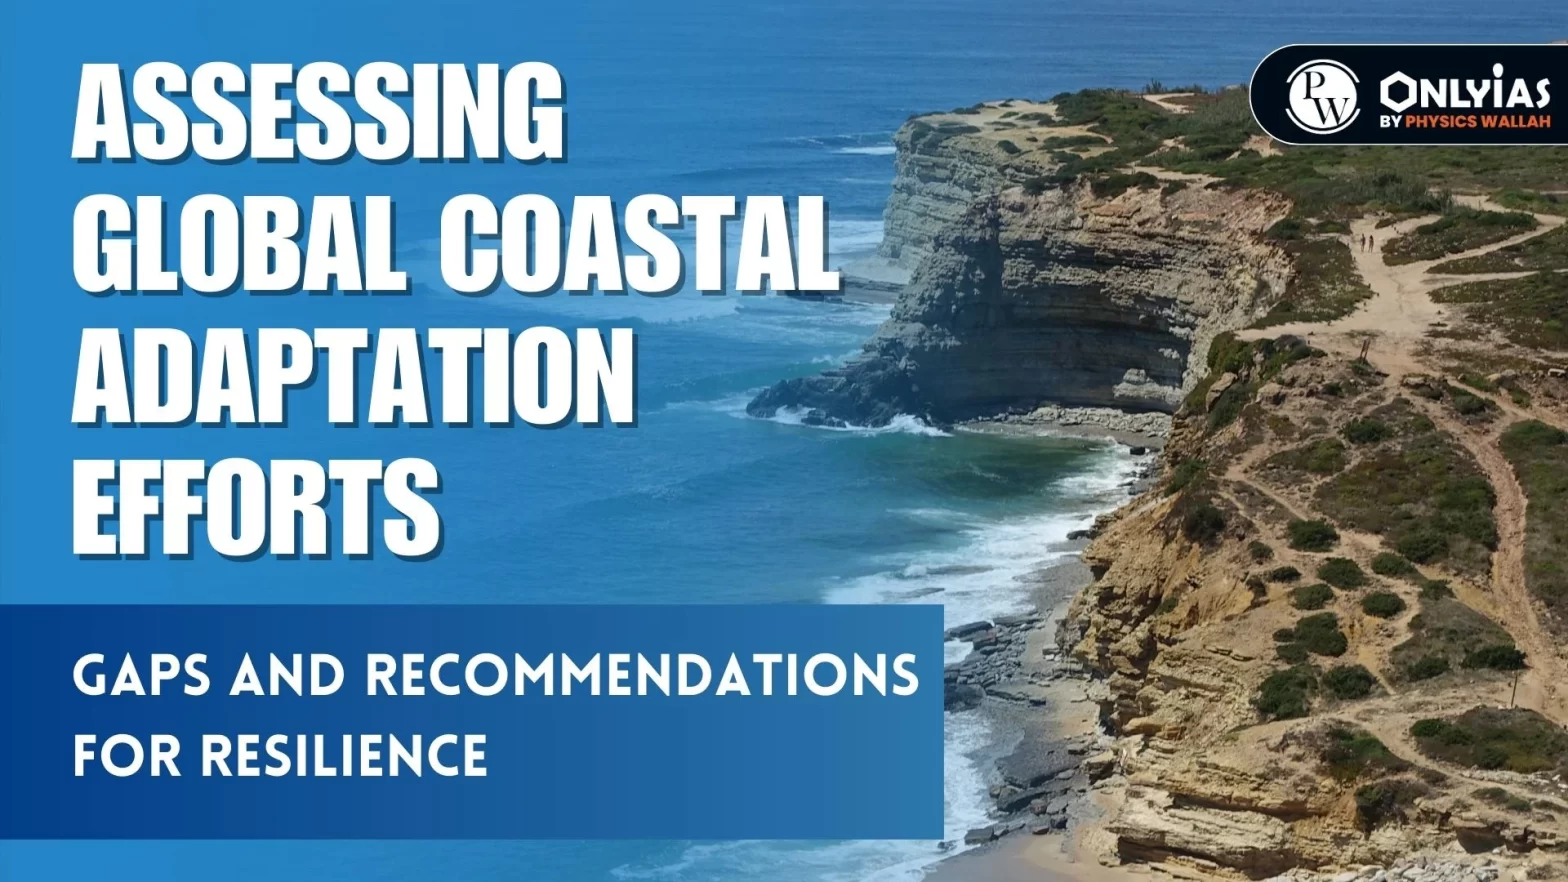 Global Coastal Adaptation Efforts: Gaps and Recommendations for Resilience